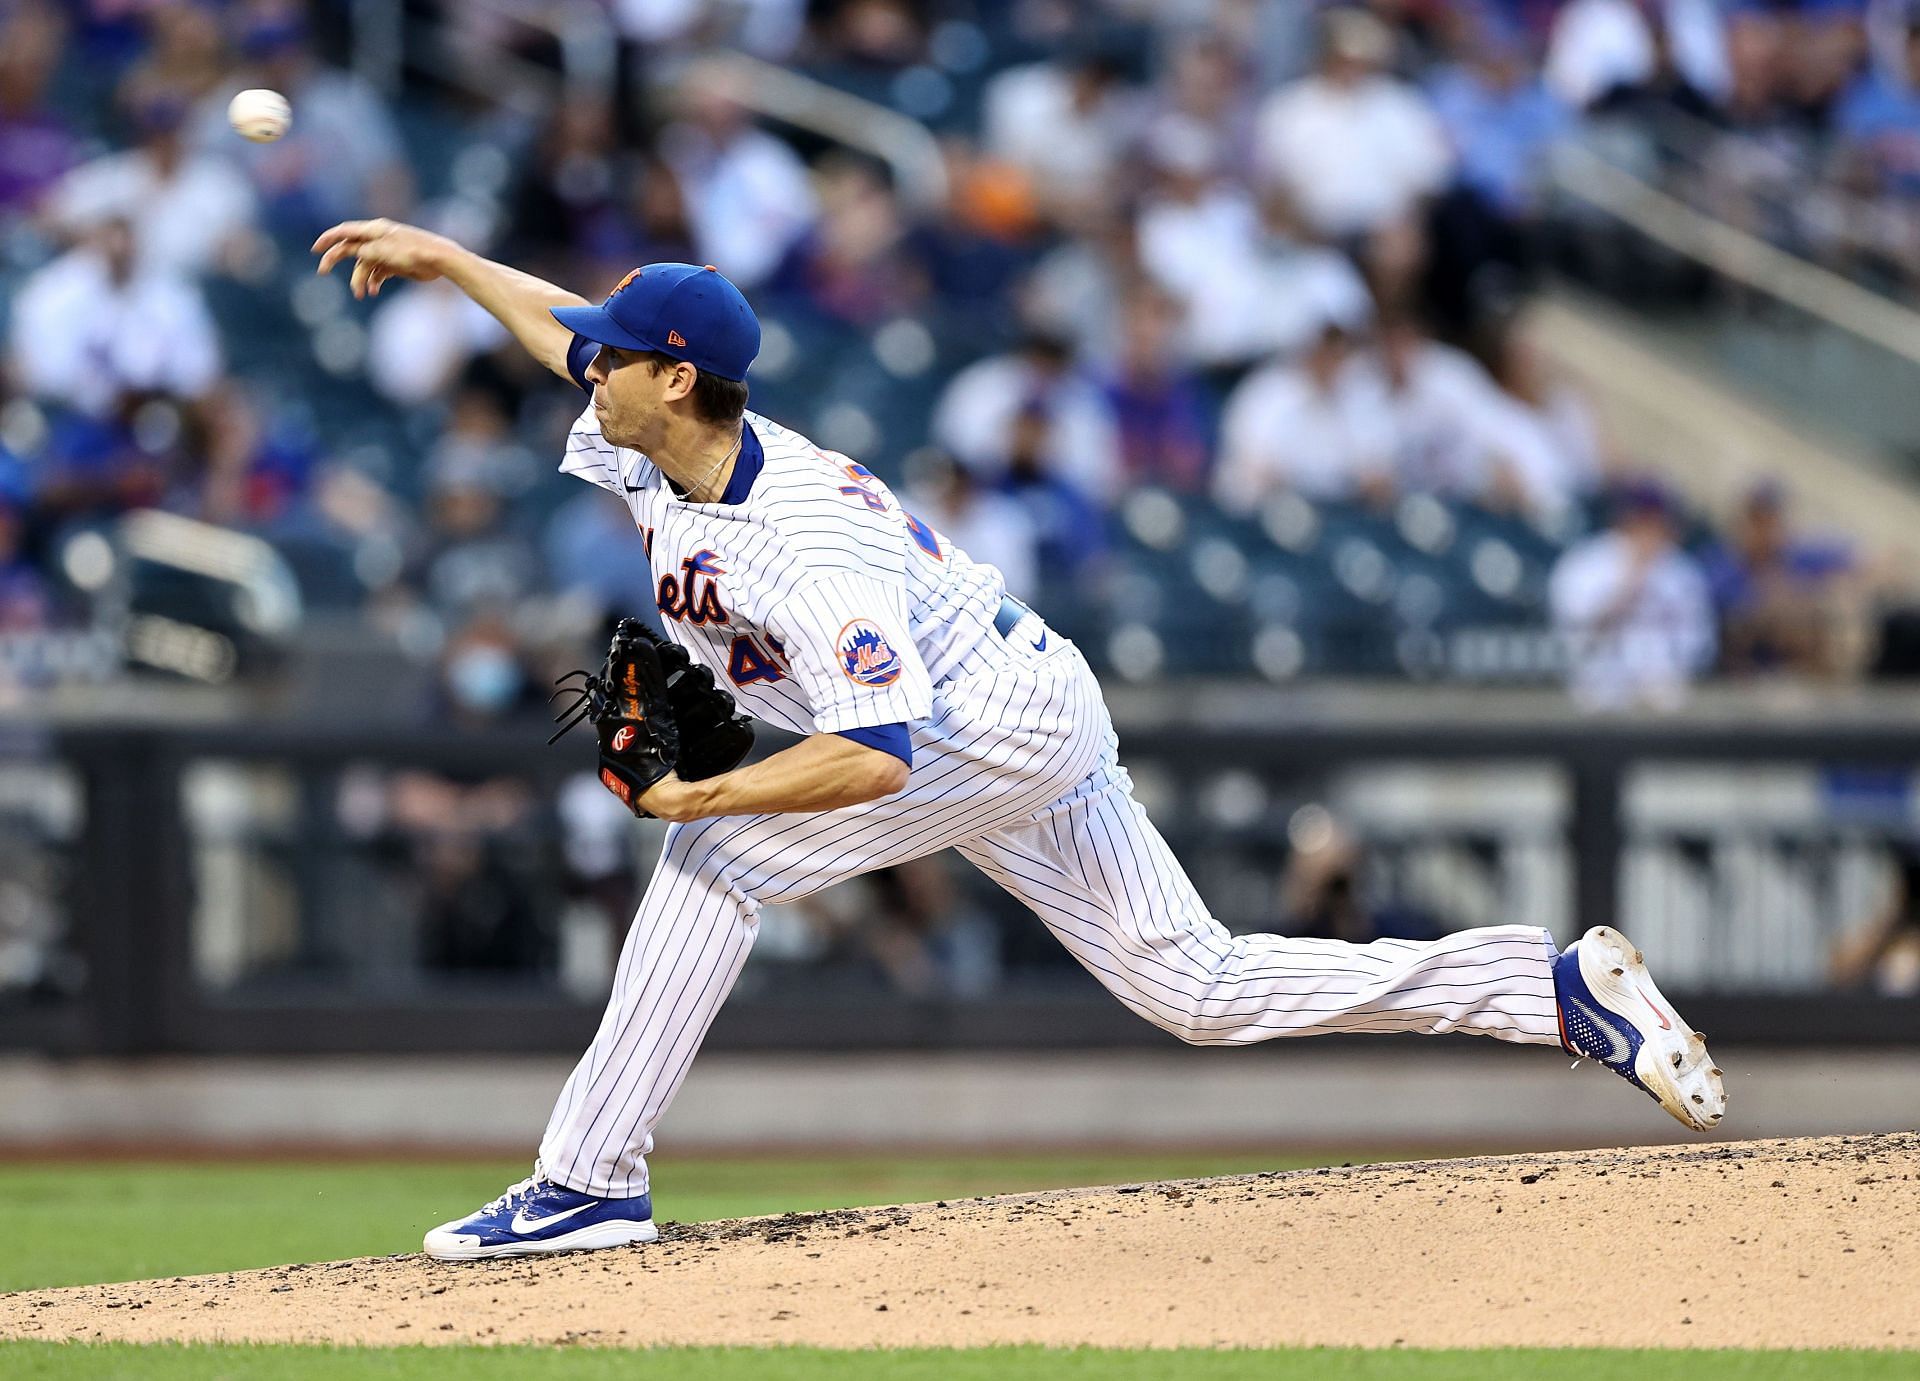 Jacob deGrom of the New York Mets delivers a pitch in the third inning against the Chicago Cubs